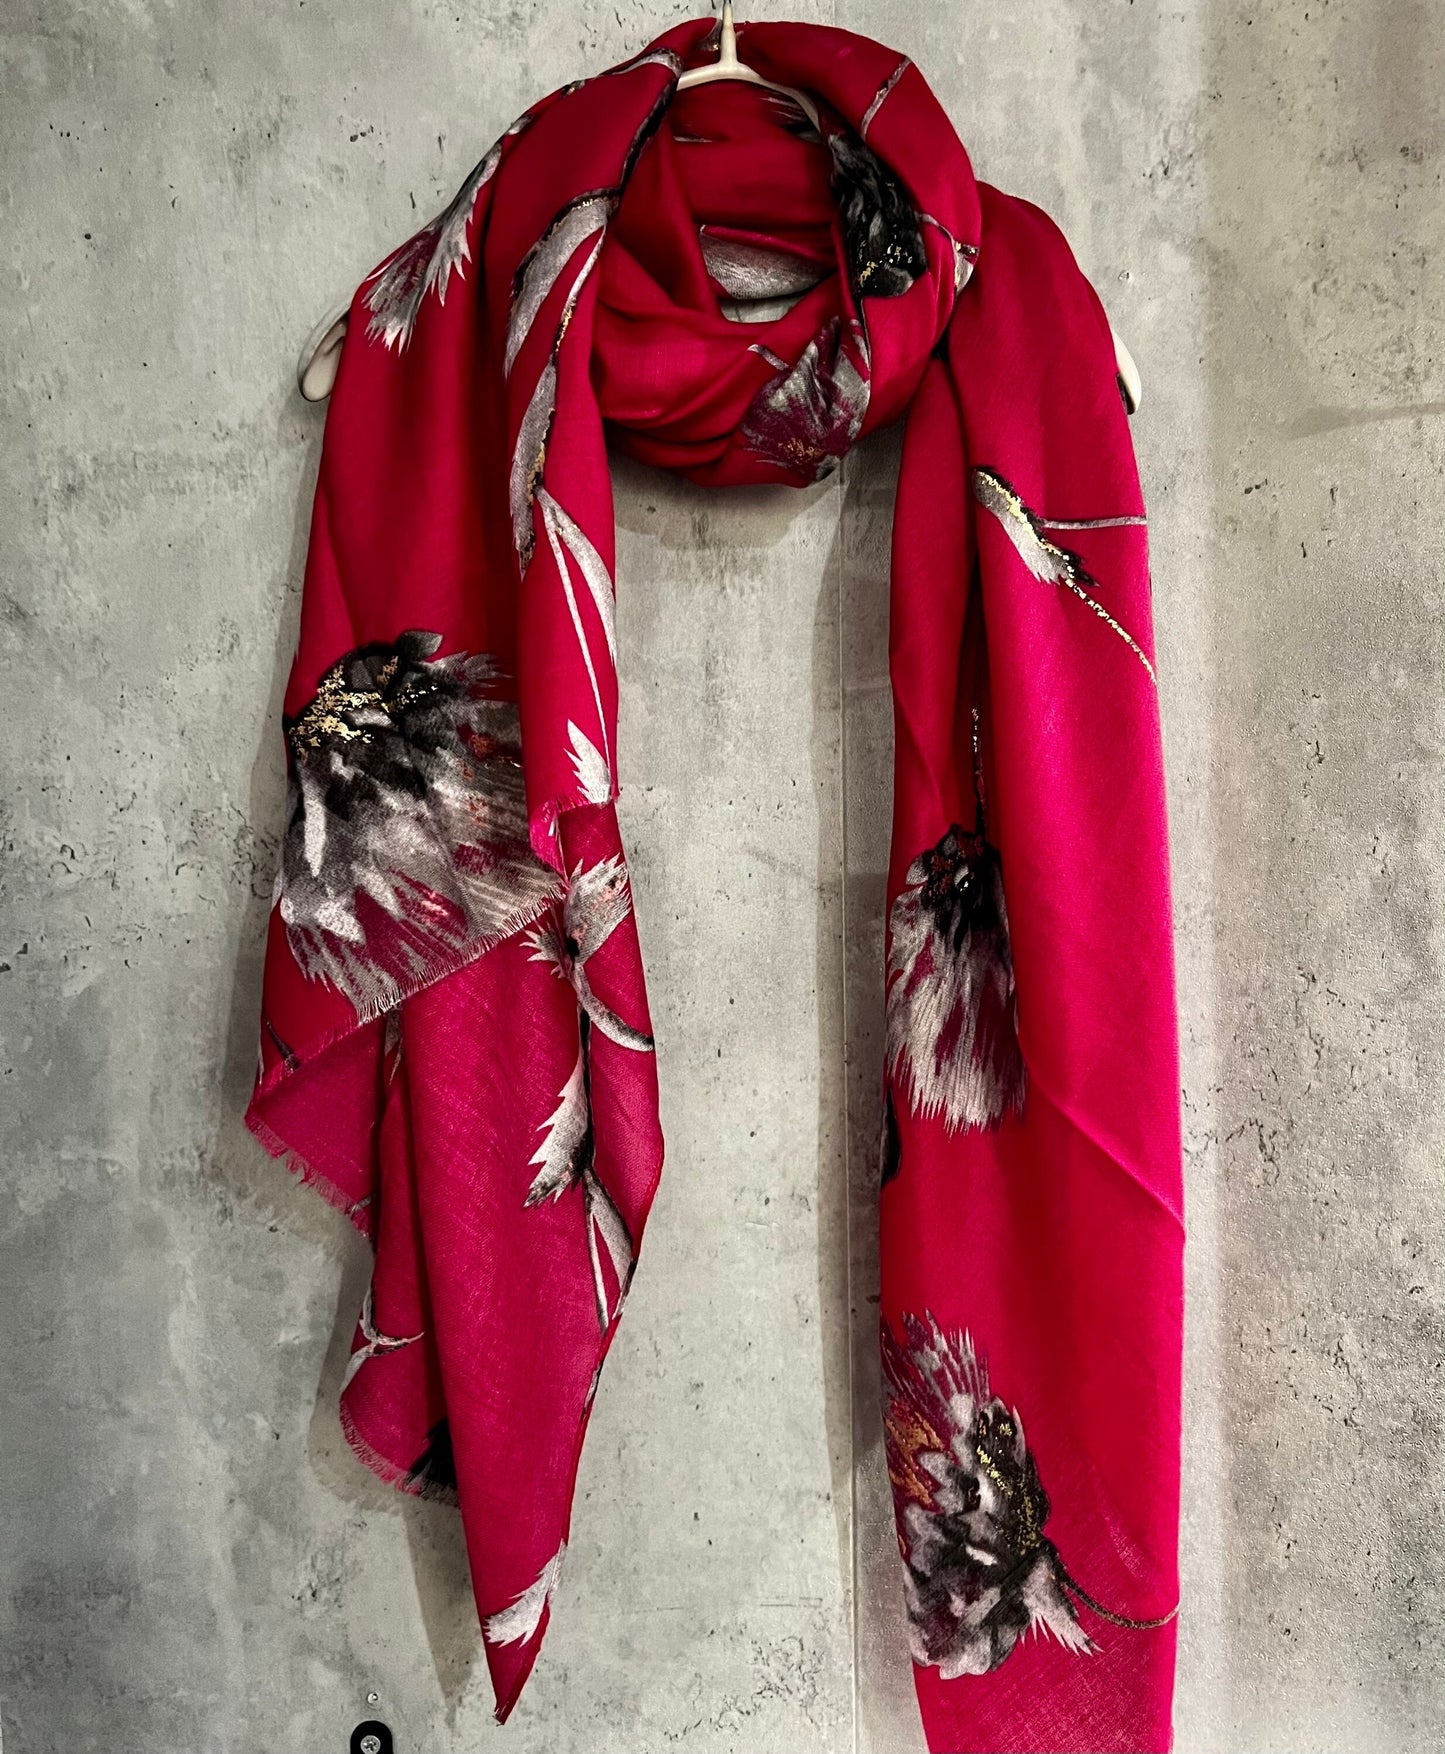 Thistle Flowers Gold Dusk Pink Cotton Scarf/Spring Summer Autumn Scarf/Scarf Women/Gift For Her Birthday Christmas/Gifts For Mum/UK Seller